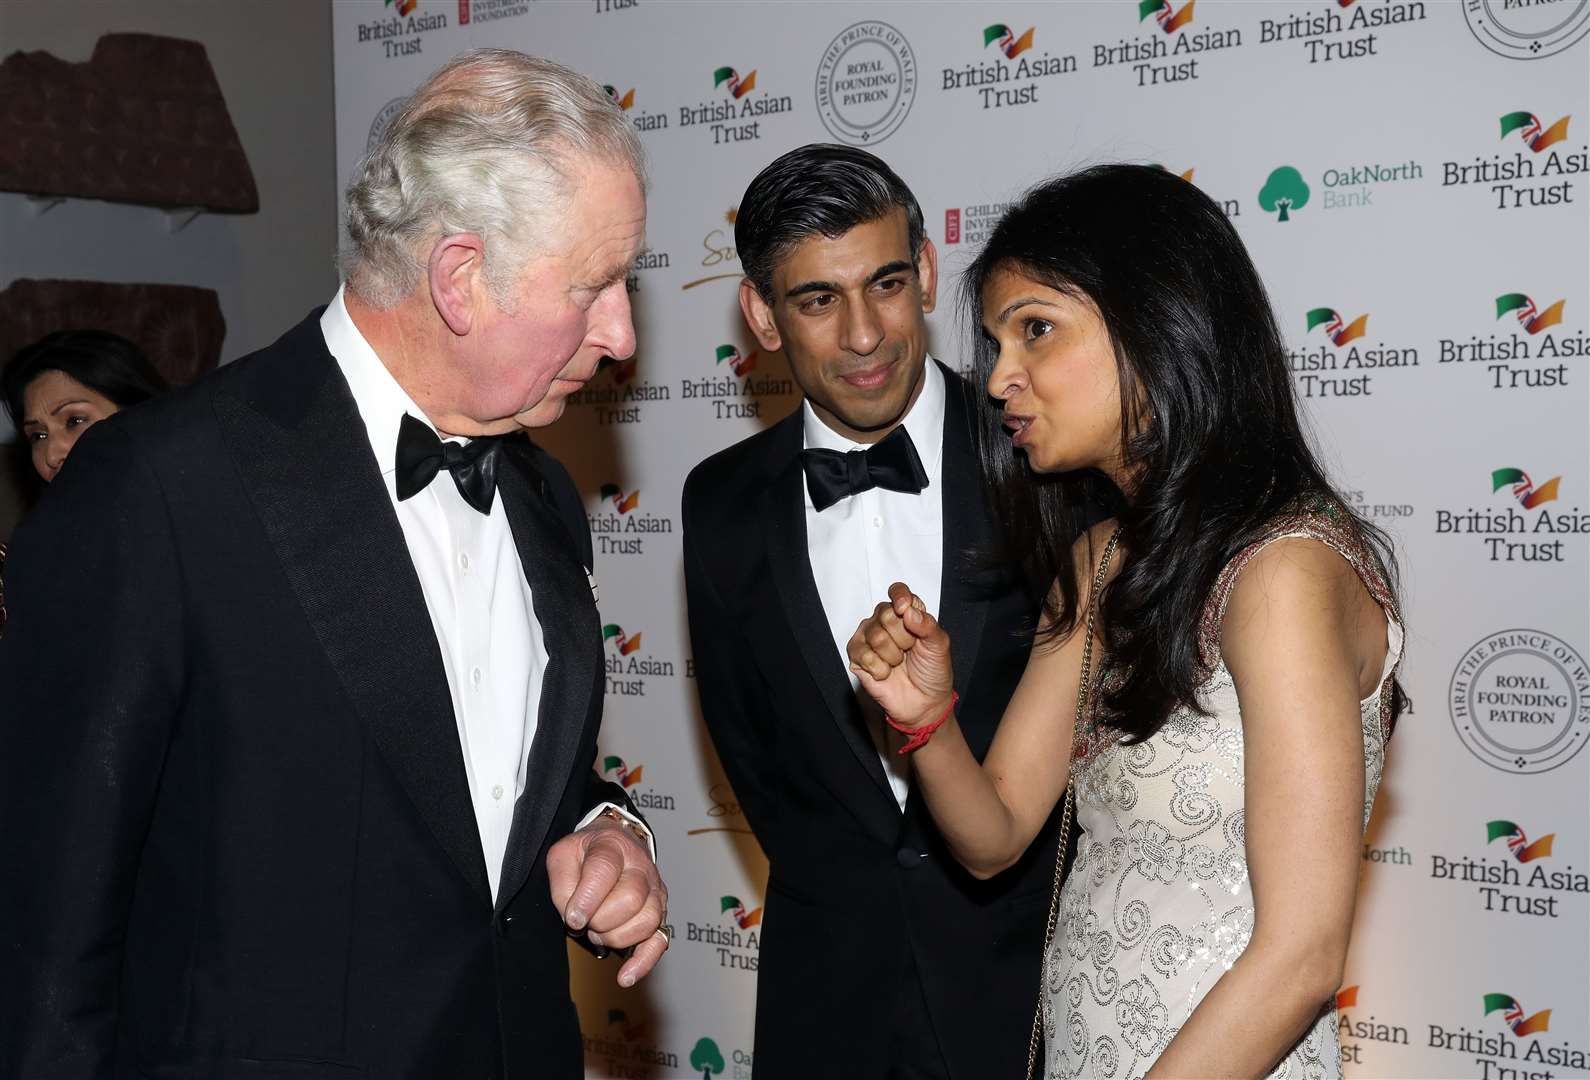 The Prince of Wales speaks to Chancellor Rishi Sunak and his wife, Akshata Murthy, at the British Asian Trust reception on Wednesday (Tristan FewingsPA)